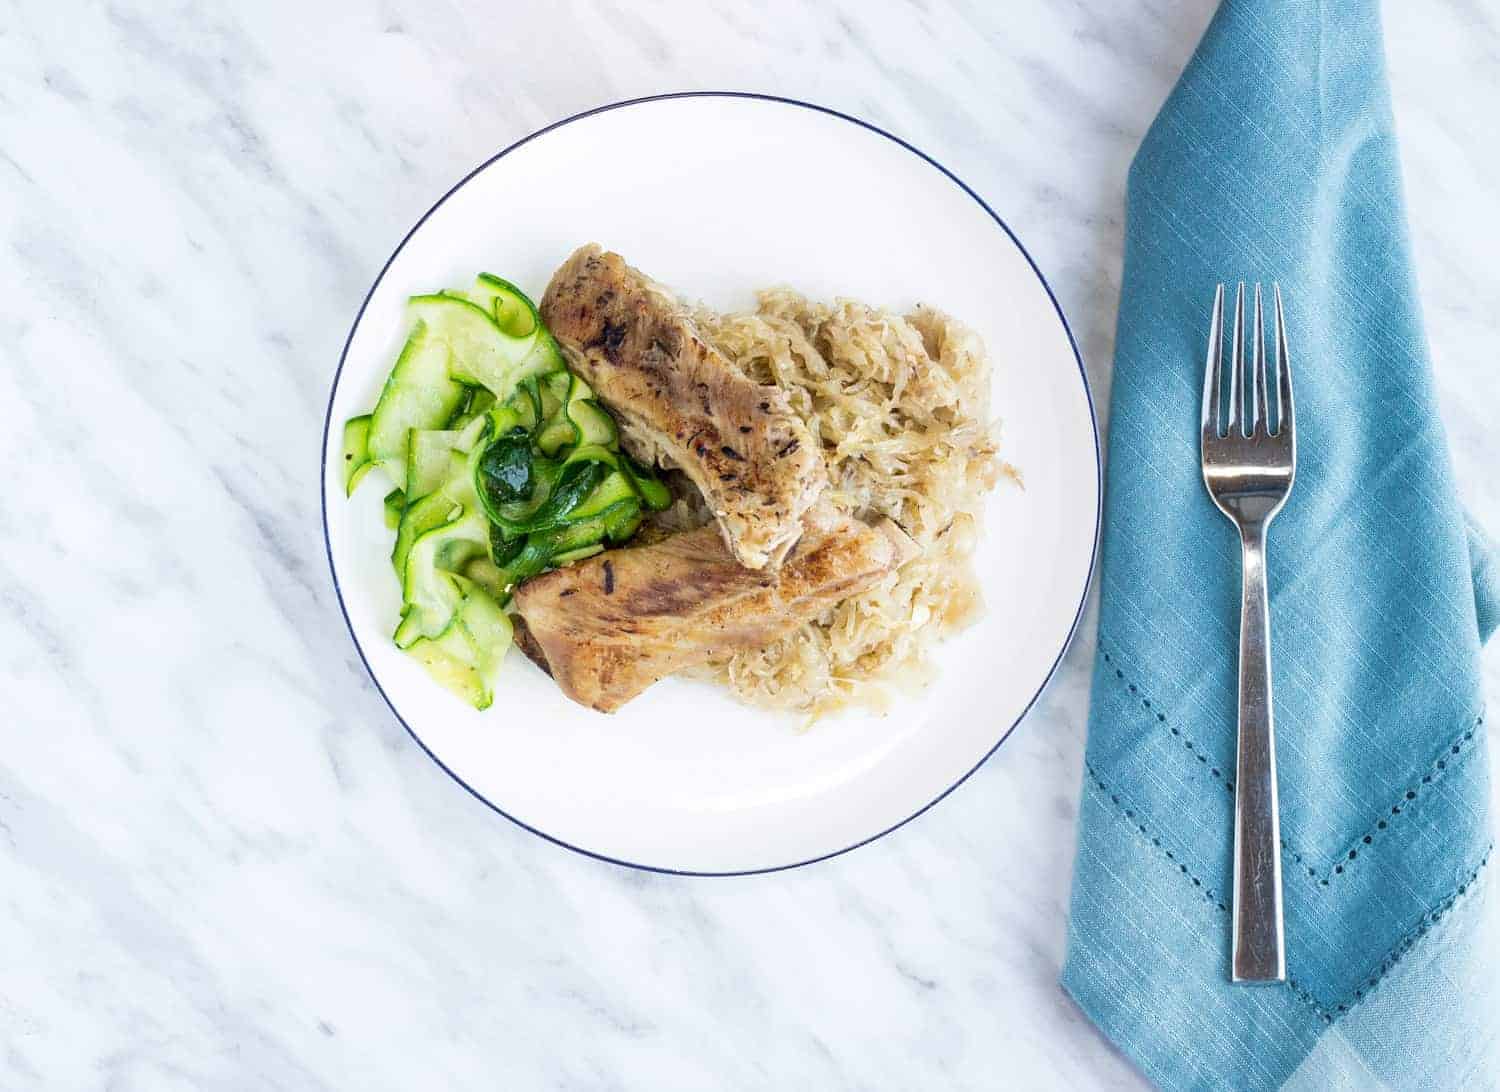 meaty ribs and sauerkraut on a plate with zucchini noodles